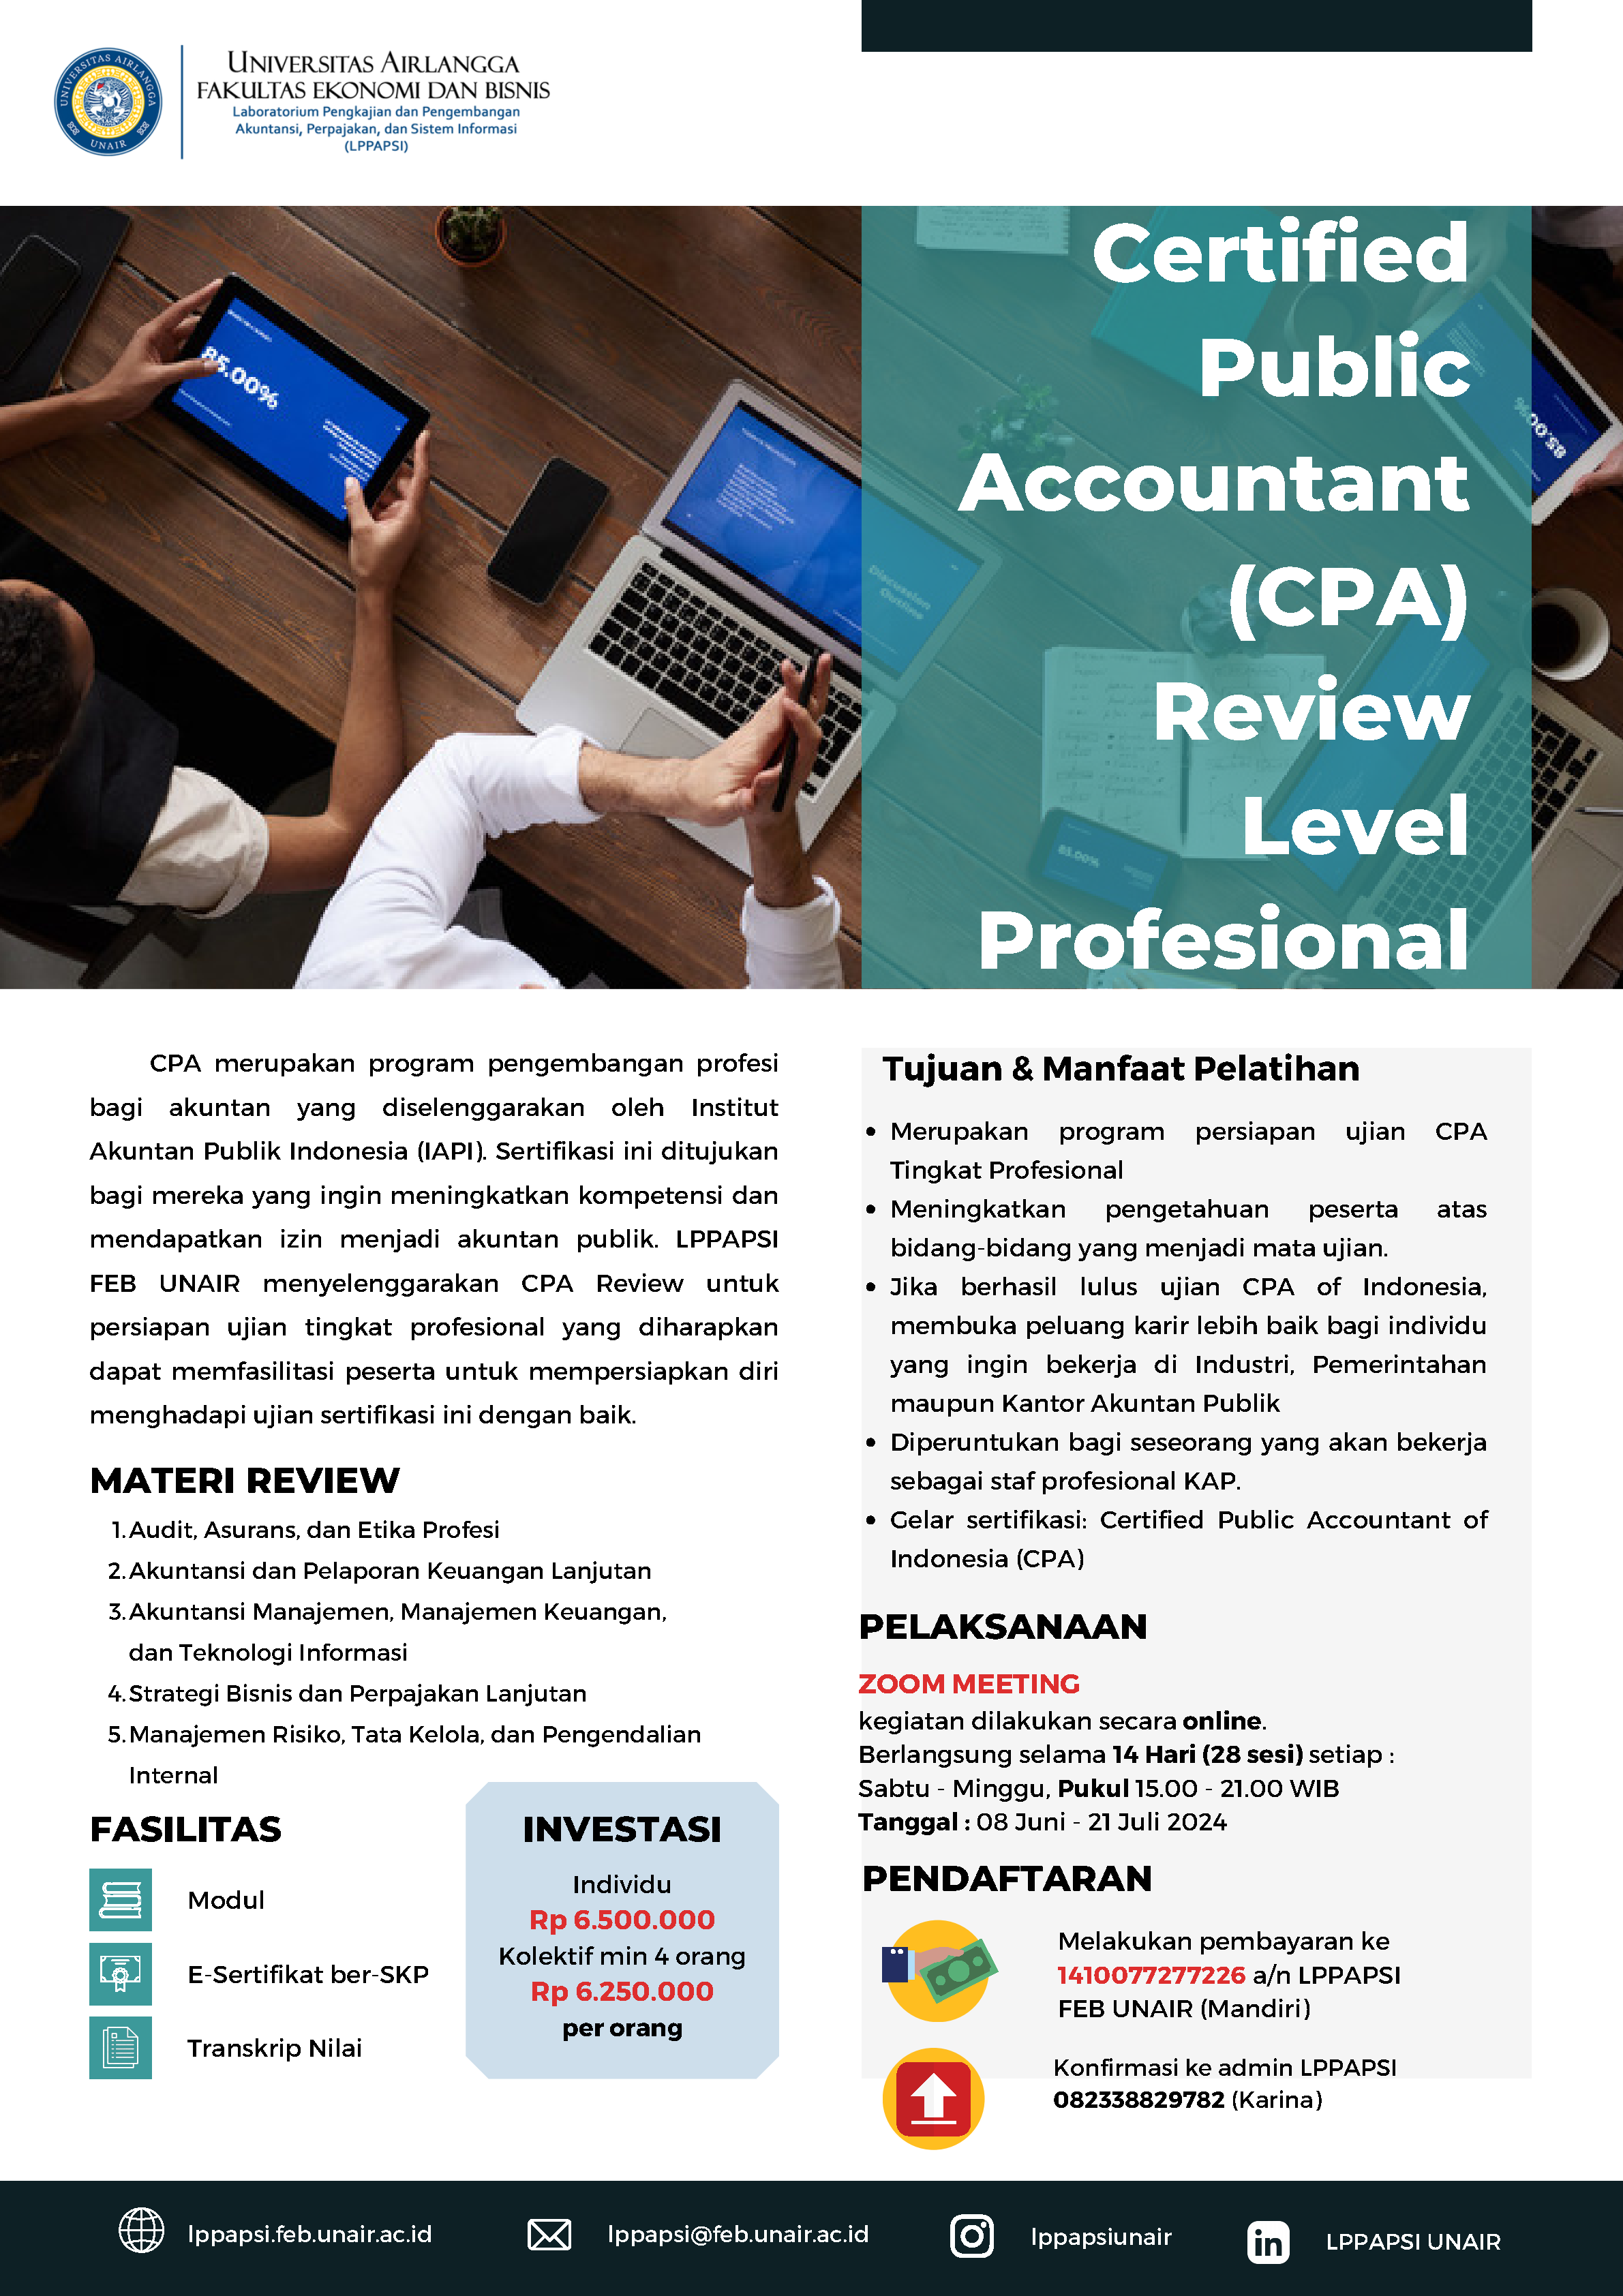 Certified Public Accountant (CPA) Review Level Profesional